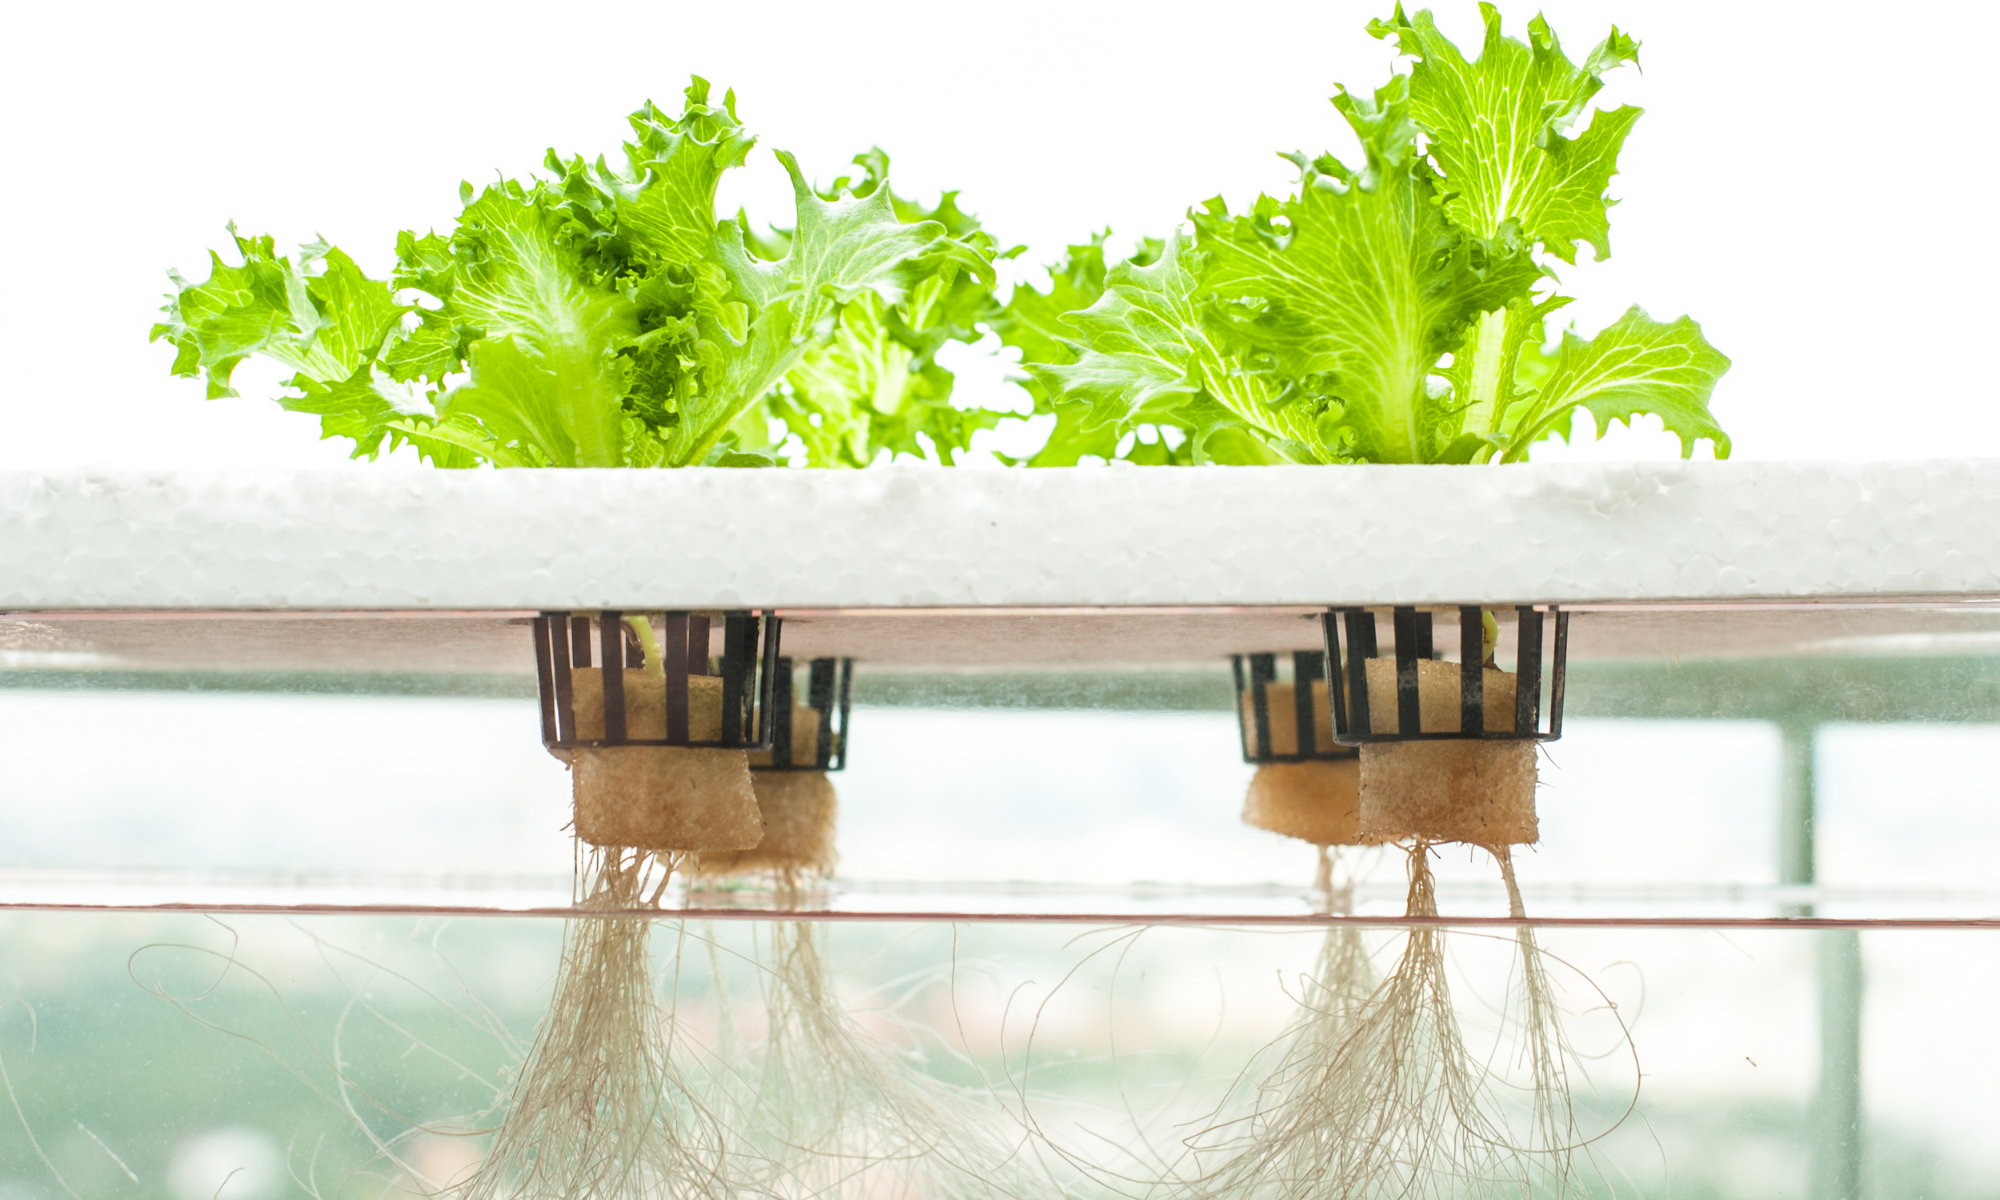 Is a Hydroponic Garden Cost Effective?